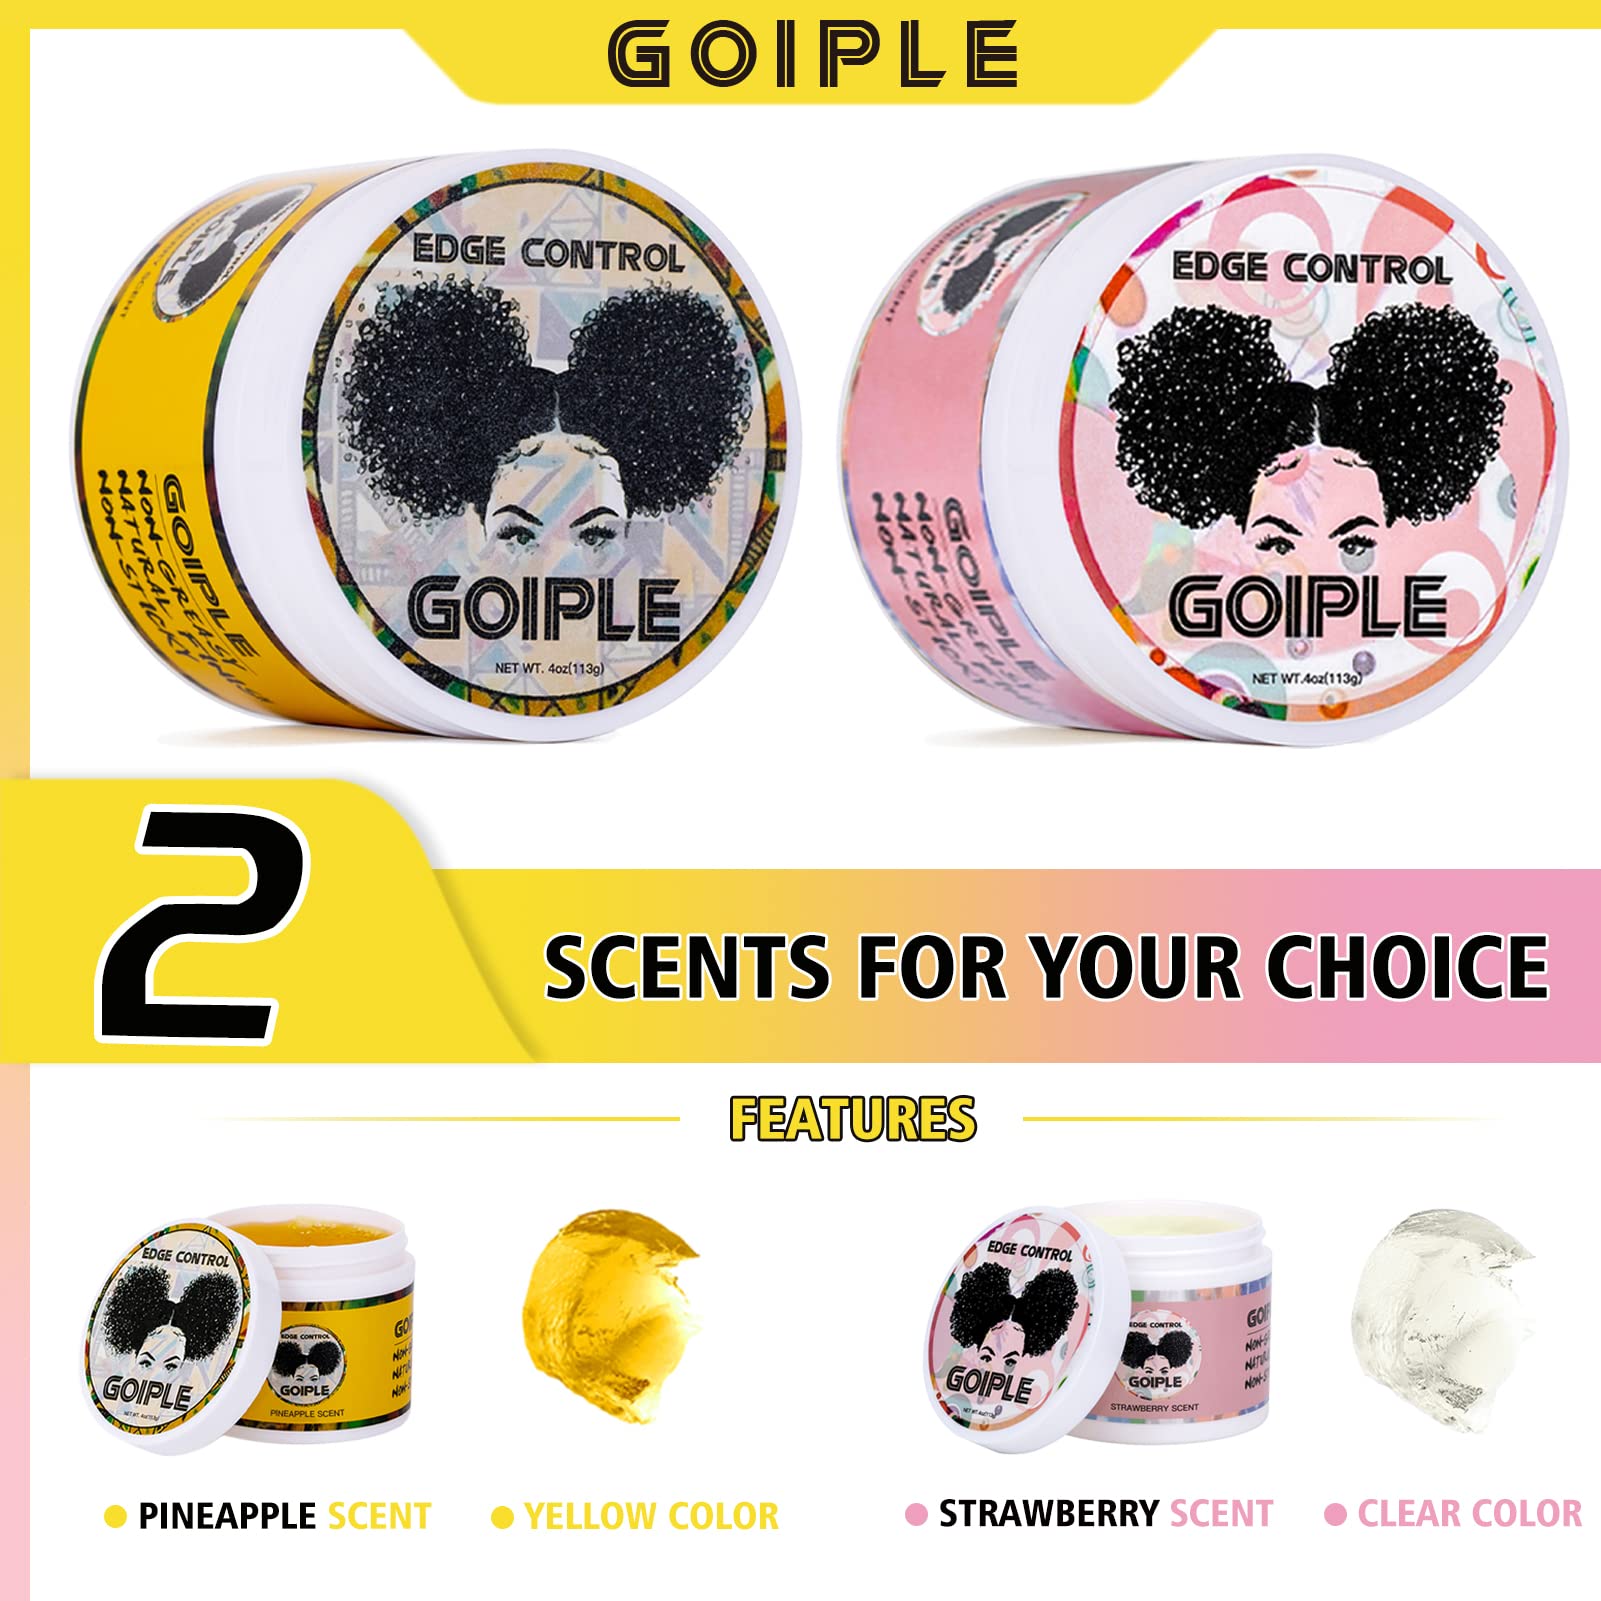 Goiple Edge Control Wax for Women Strong Hold